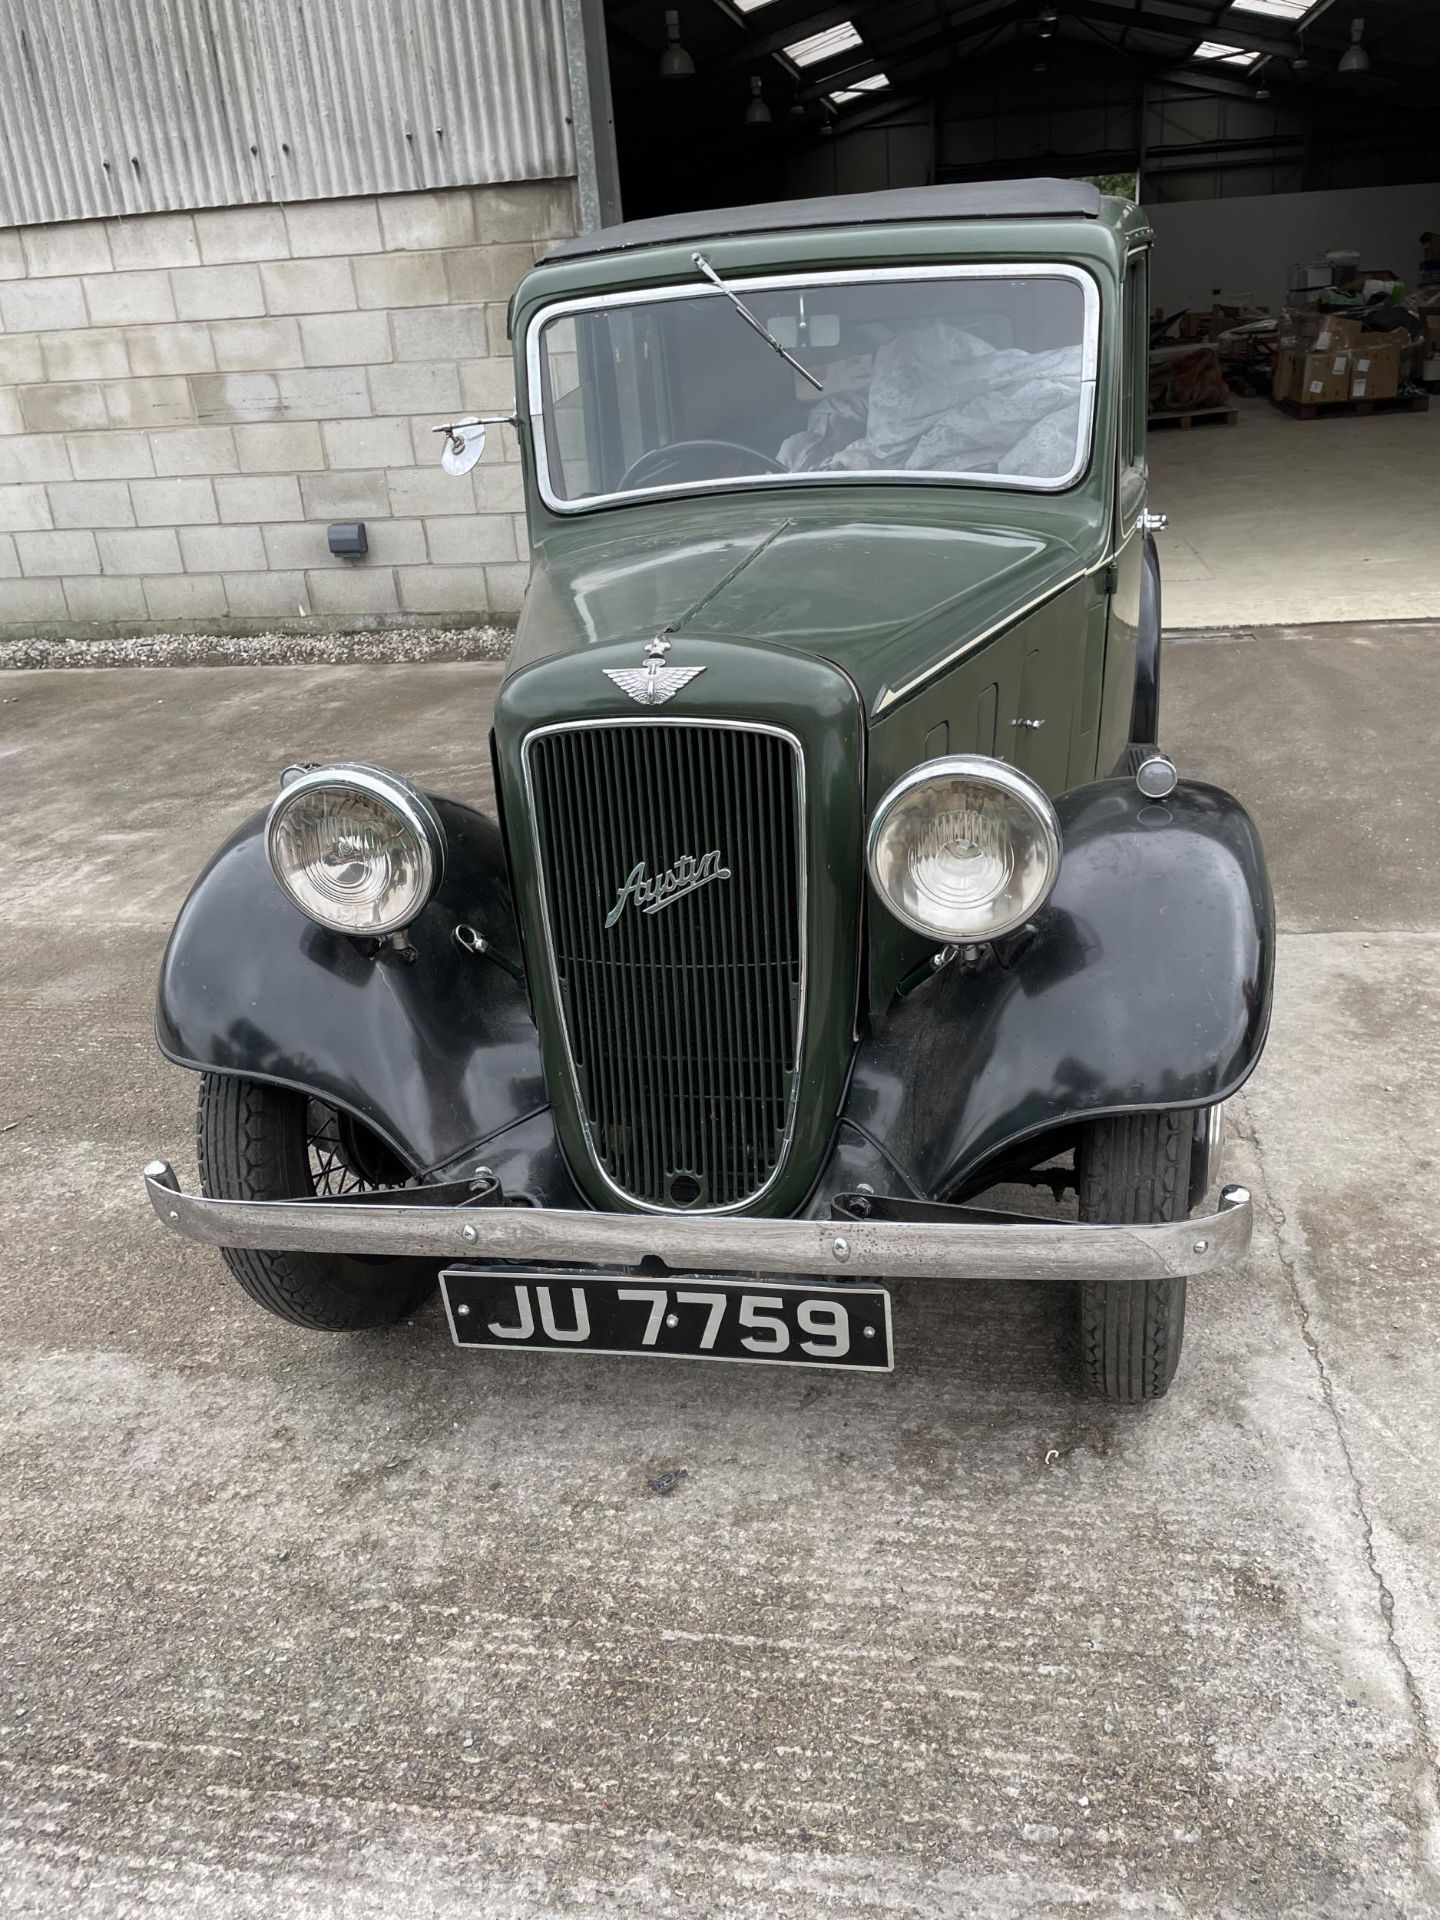 A 1935 AUSTIN 10 MOTOR CAR - REGISTRATION JU 7759, IN VERY GOOD CONDITION, STARTS AND RUNS, ON A V5C - Image 2 of 10